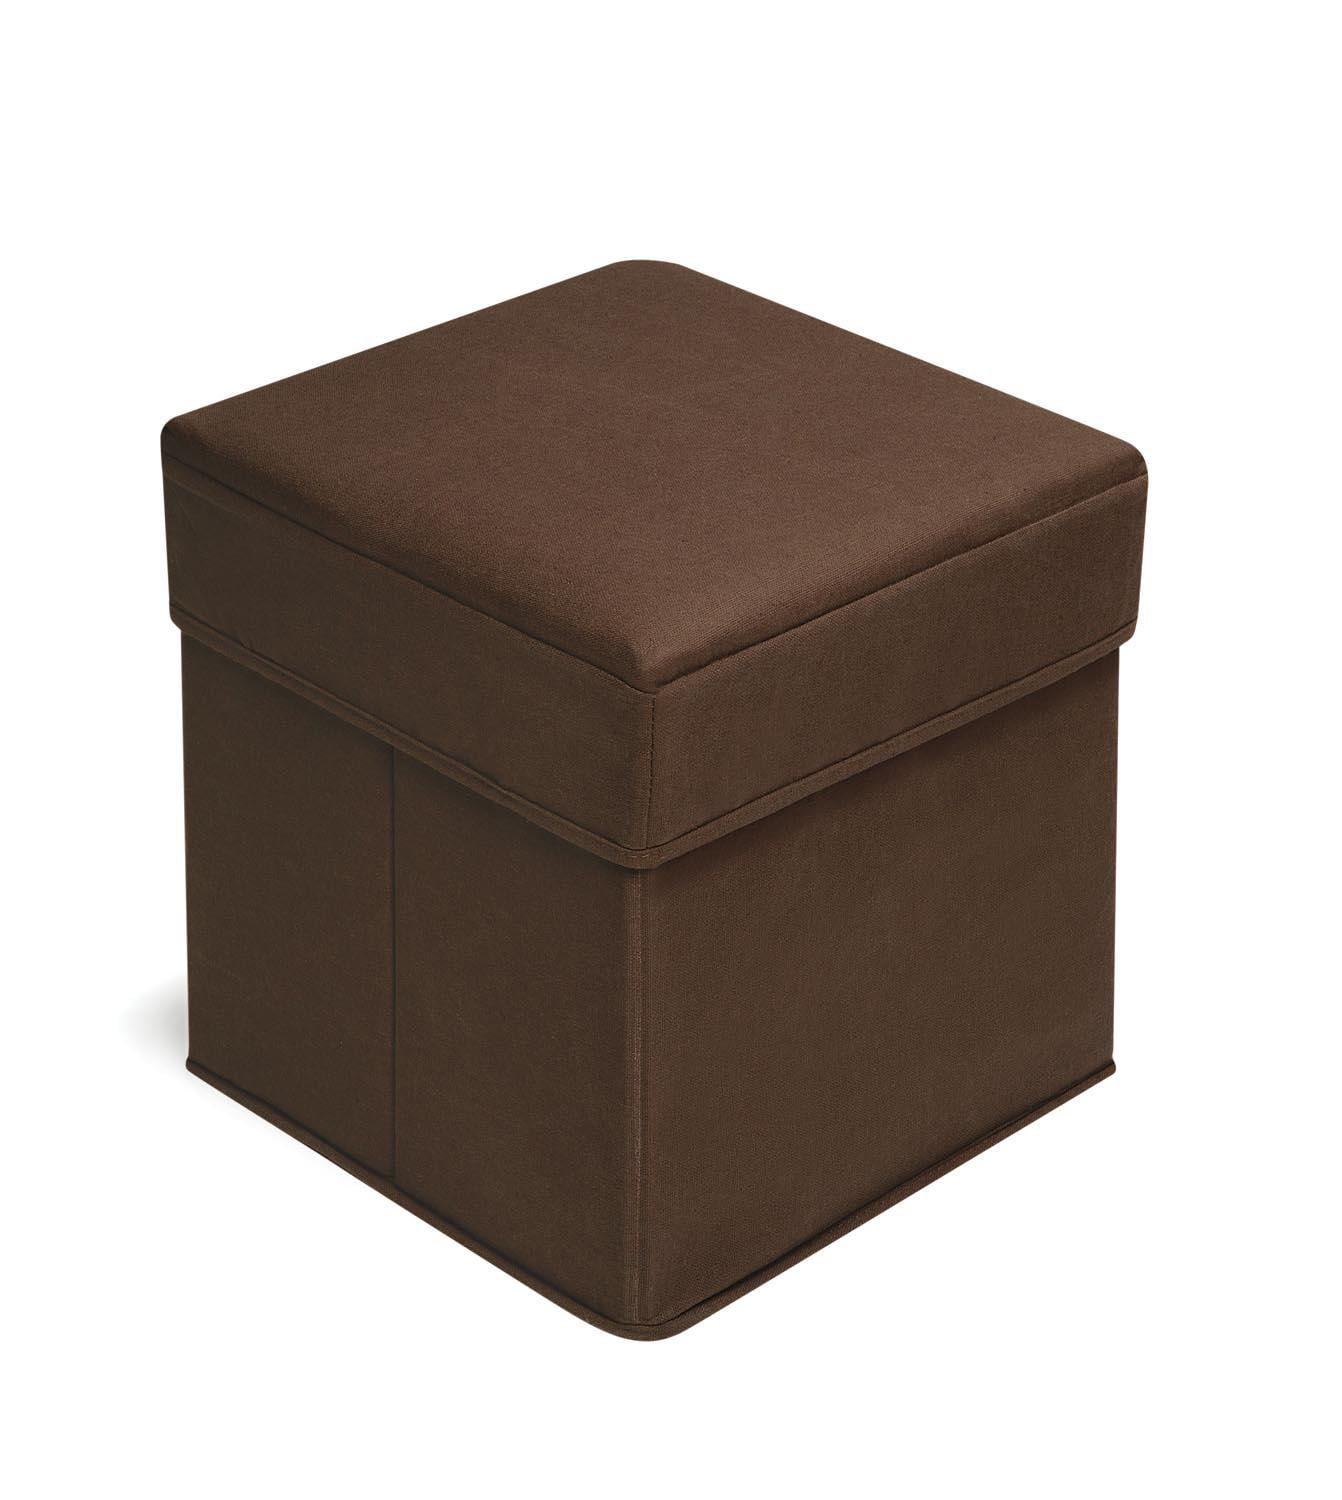 diamante storage Fordable ottoman heavy duty leather Pouffe foot stool toy box 